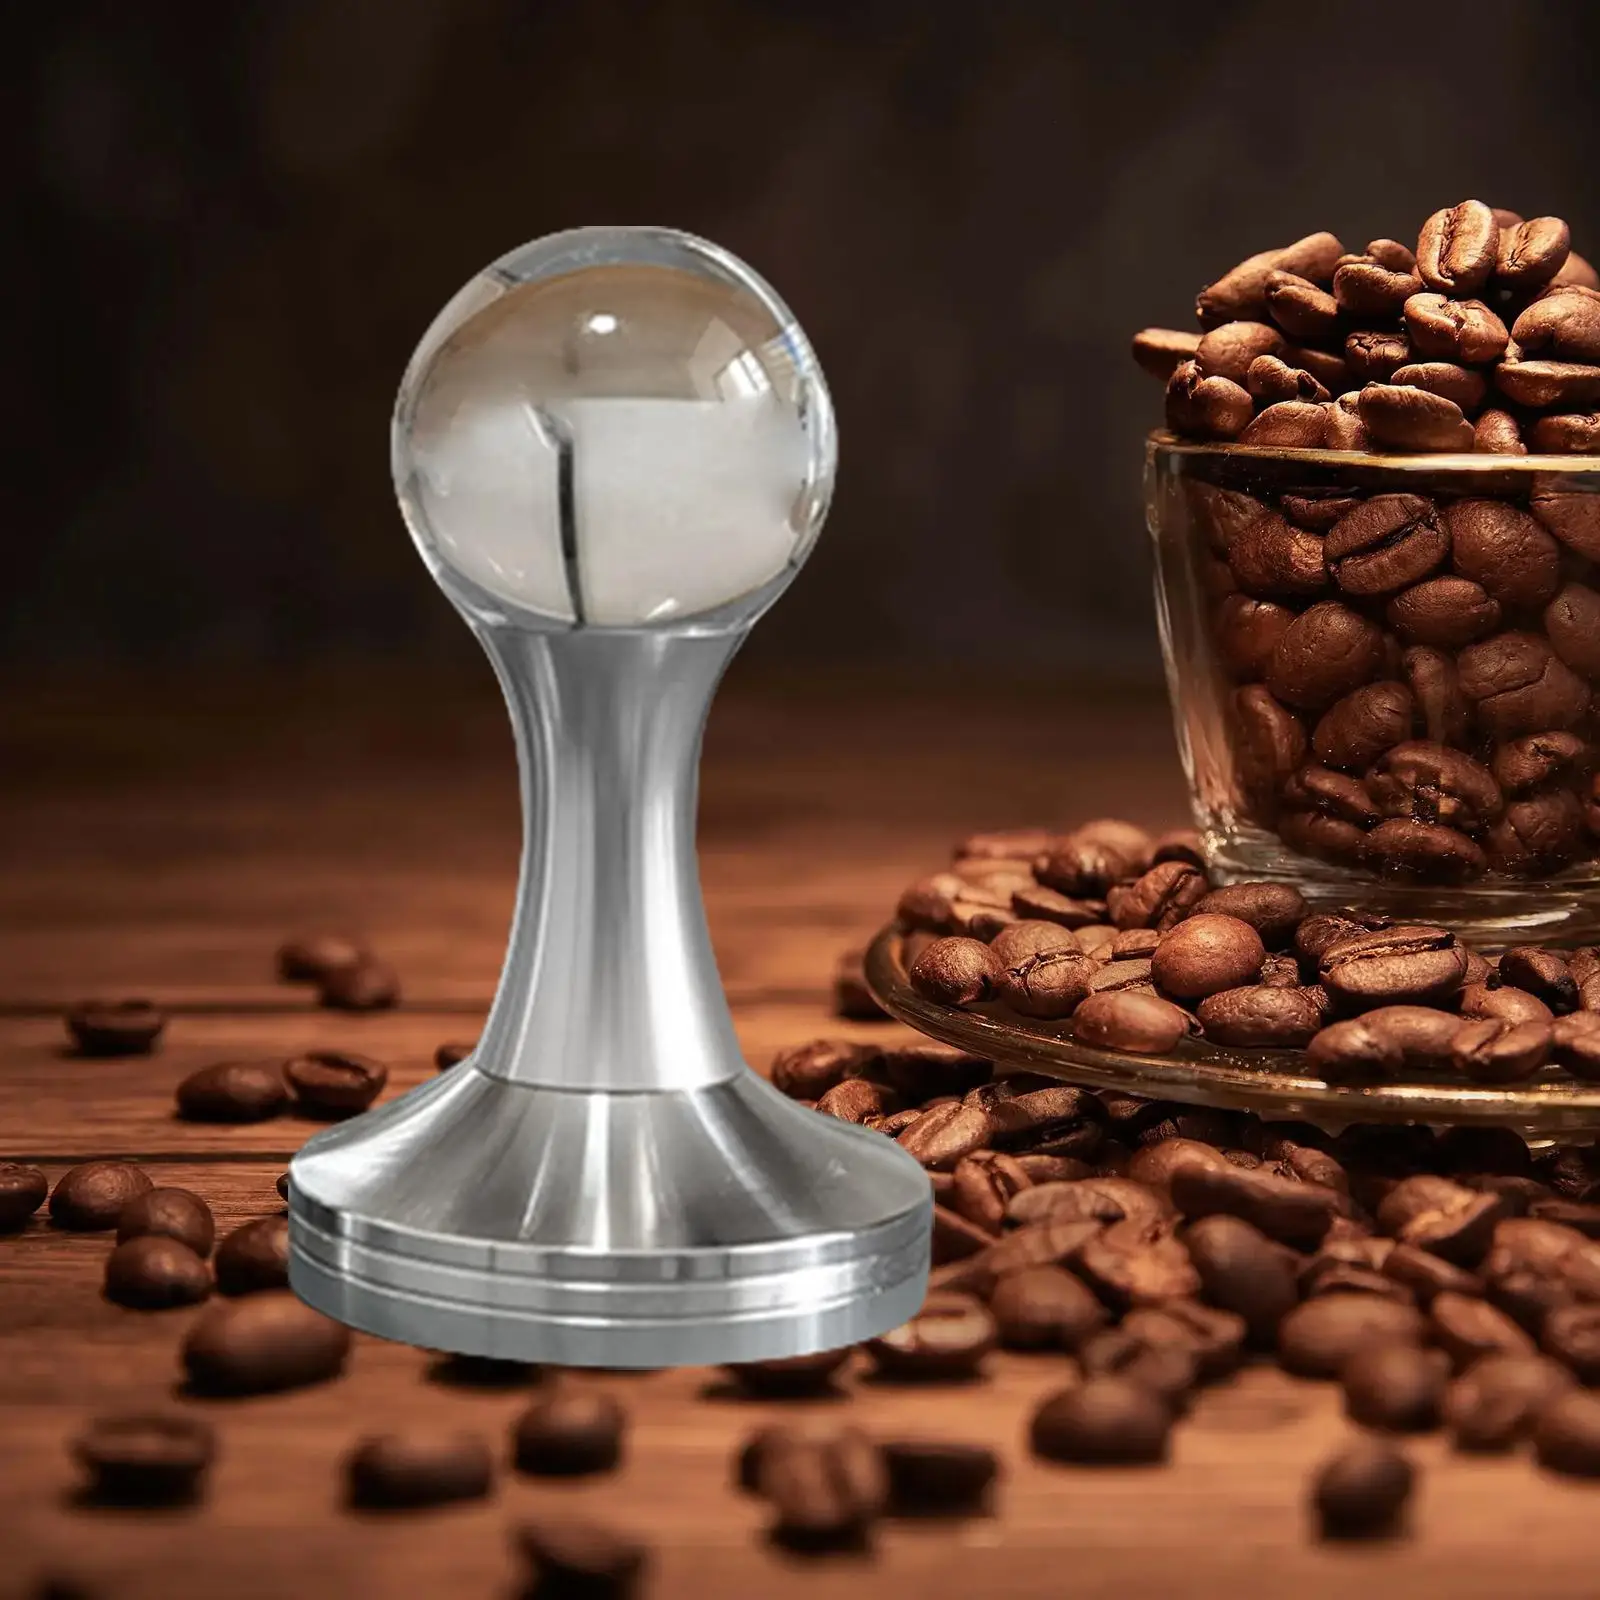 Stainless Steel Coffee Tamper Coffee Leveler Tamper Coffee Accessories